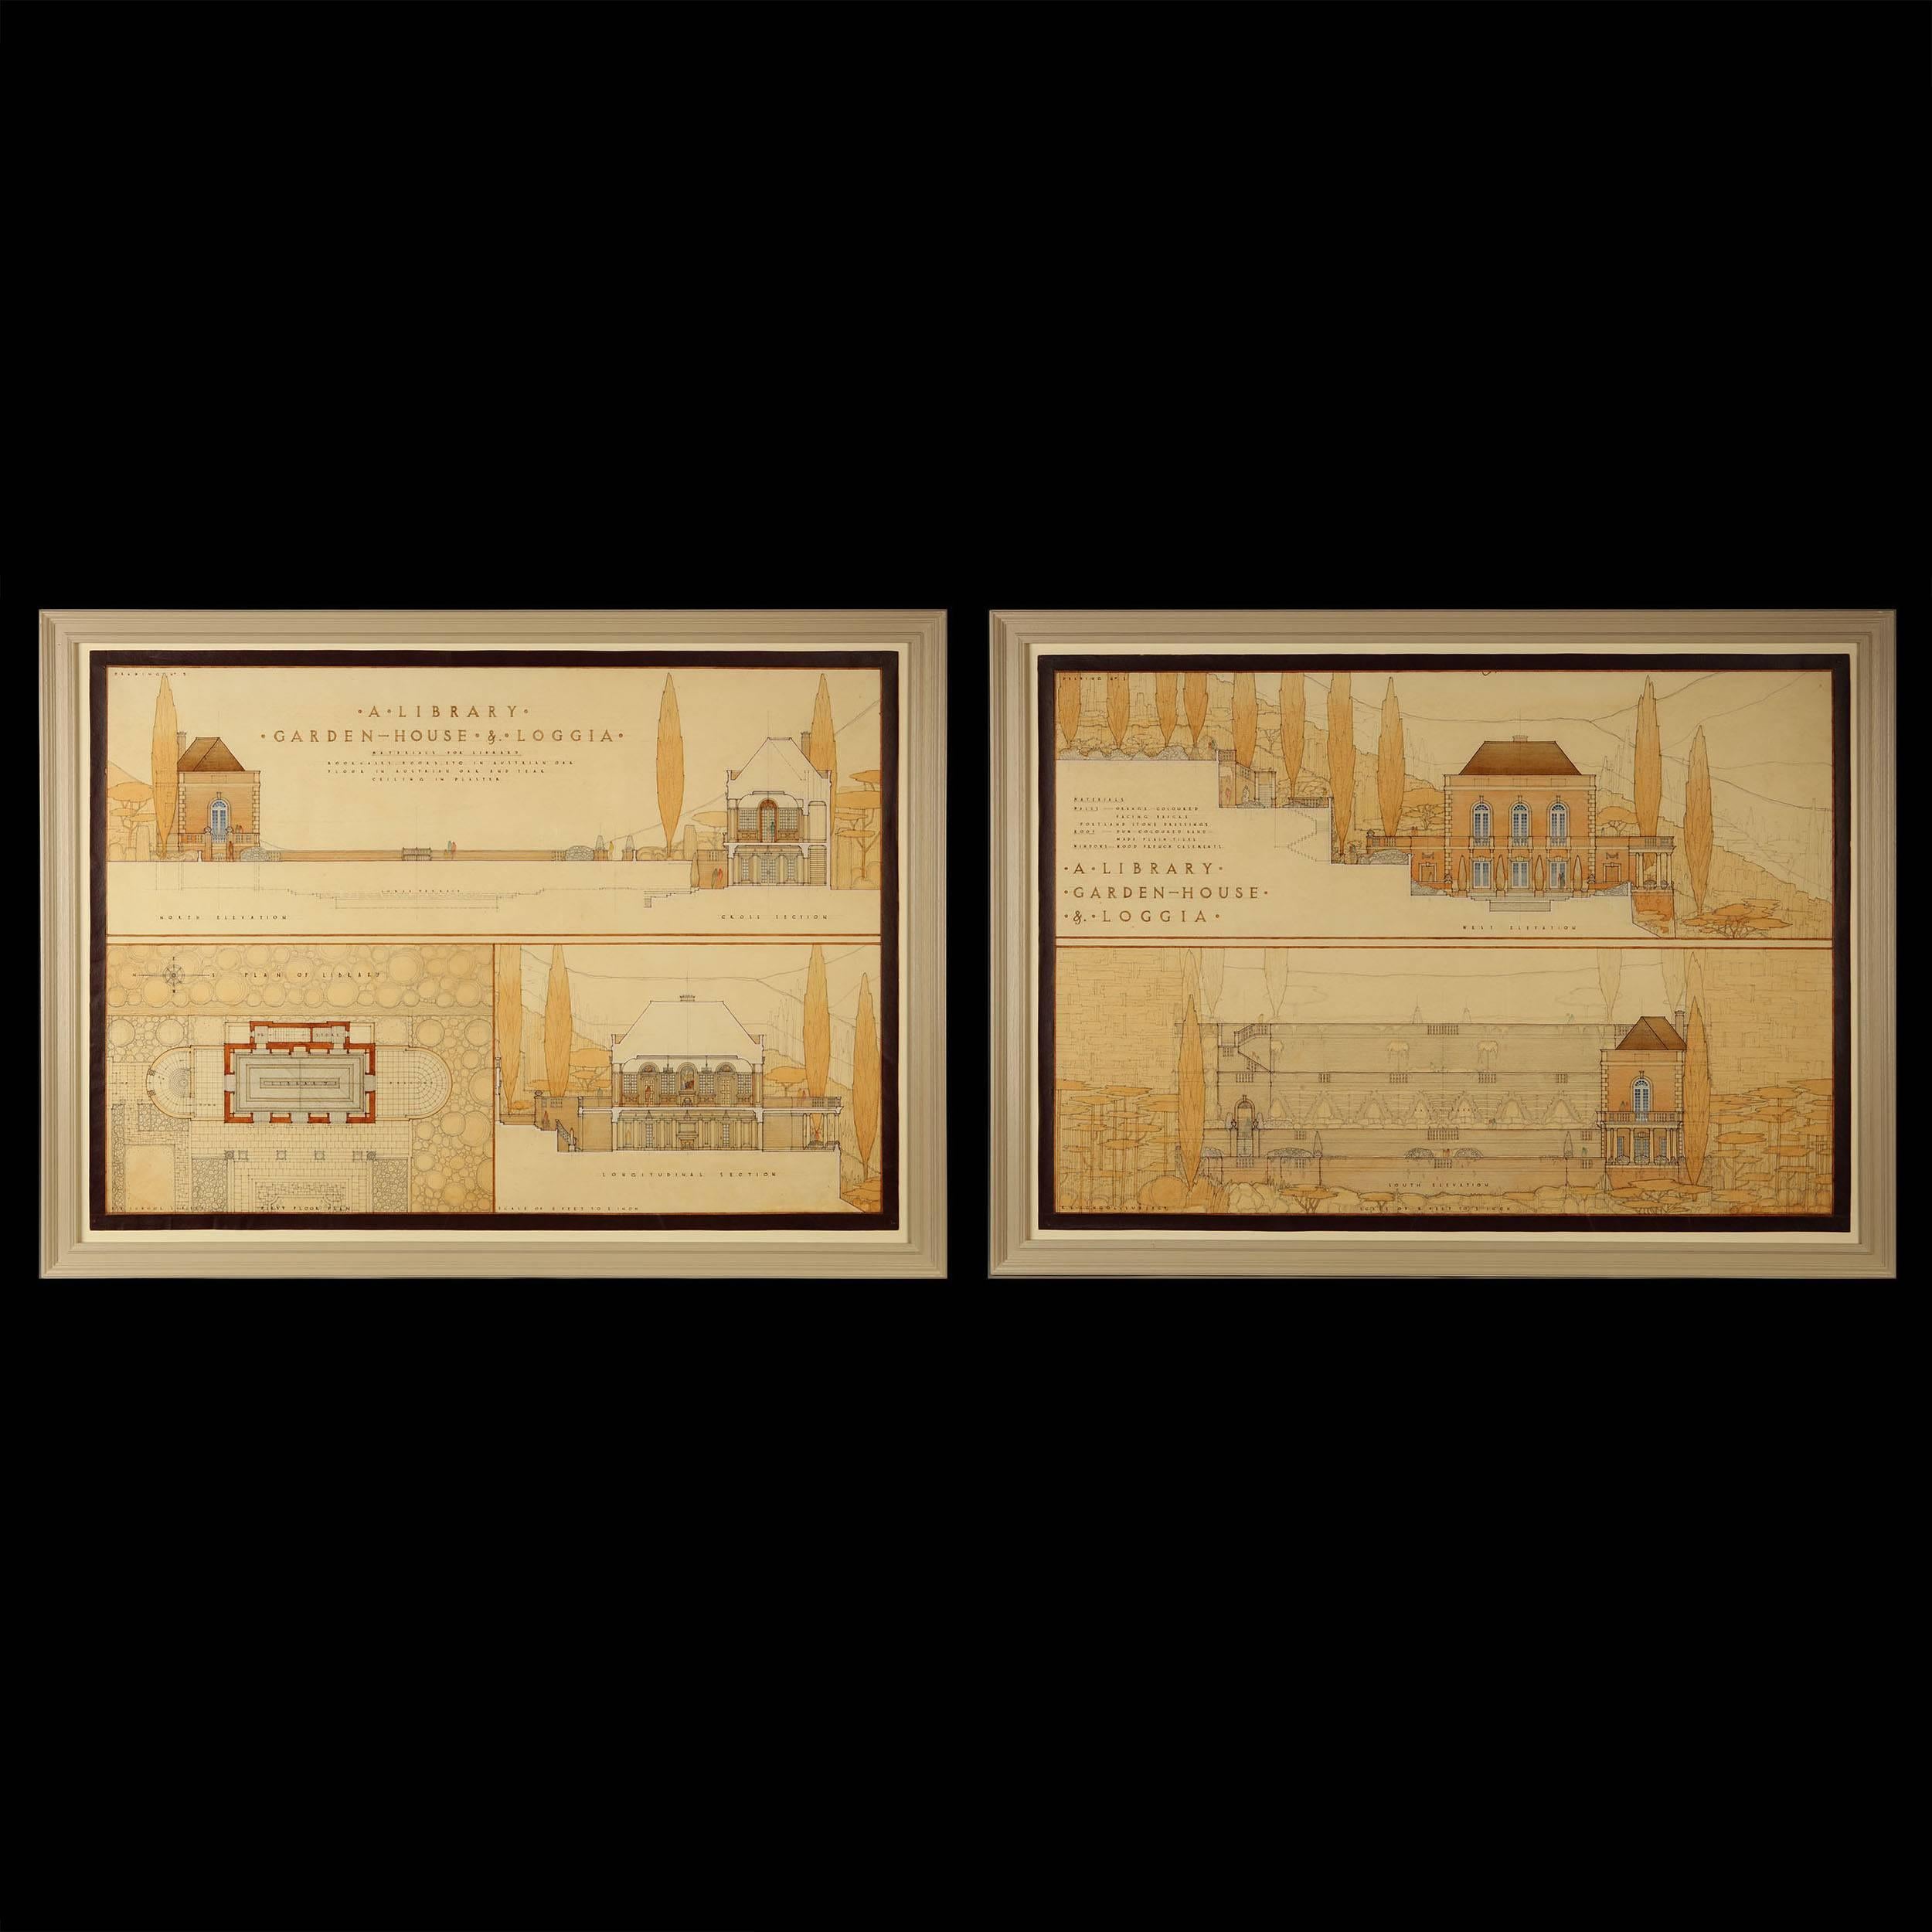 A set of four architectural drawings by E. C. Marriott RIBA, of proposed designs for libraries and garden pavilions.